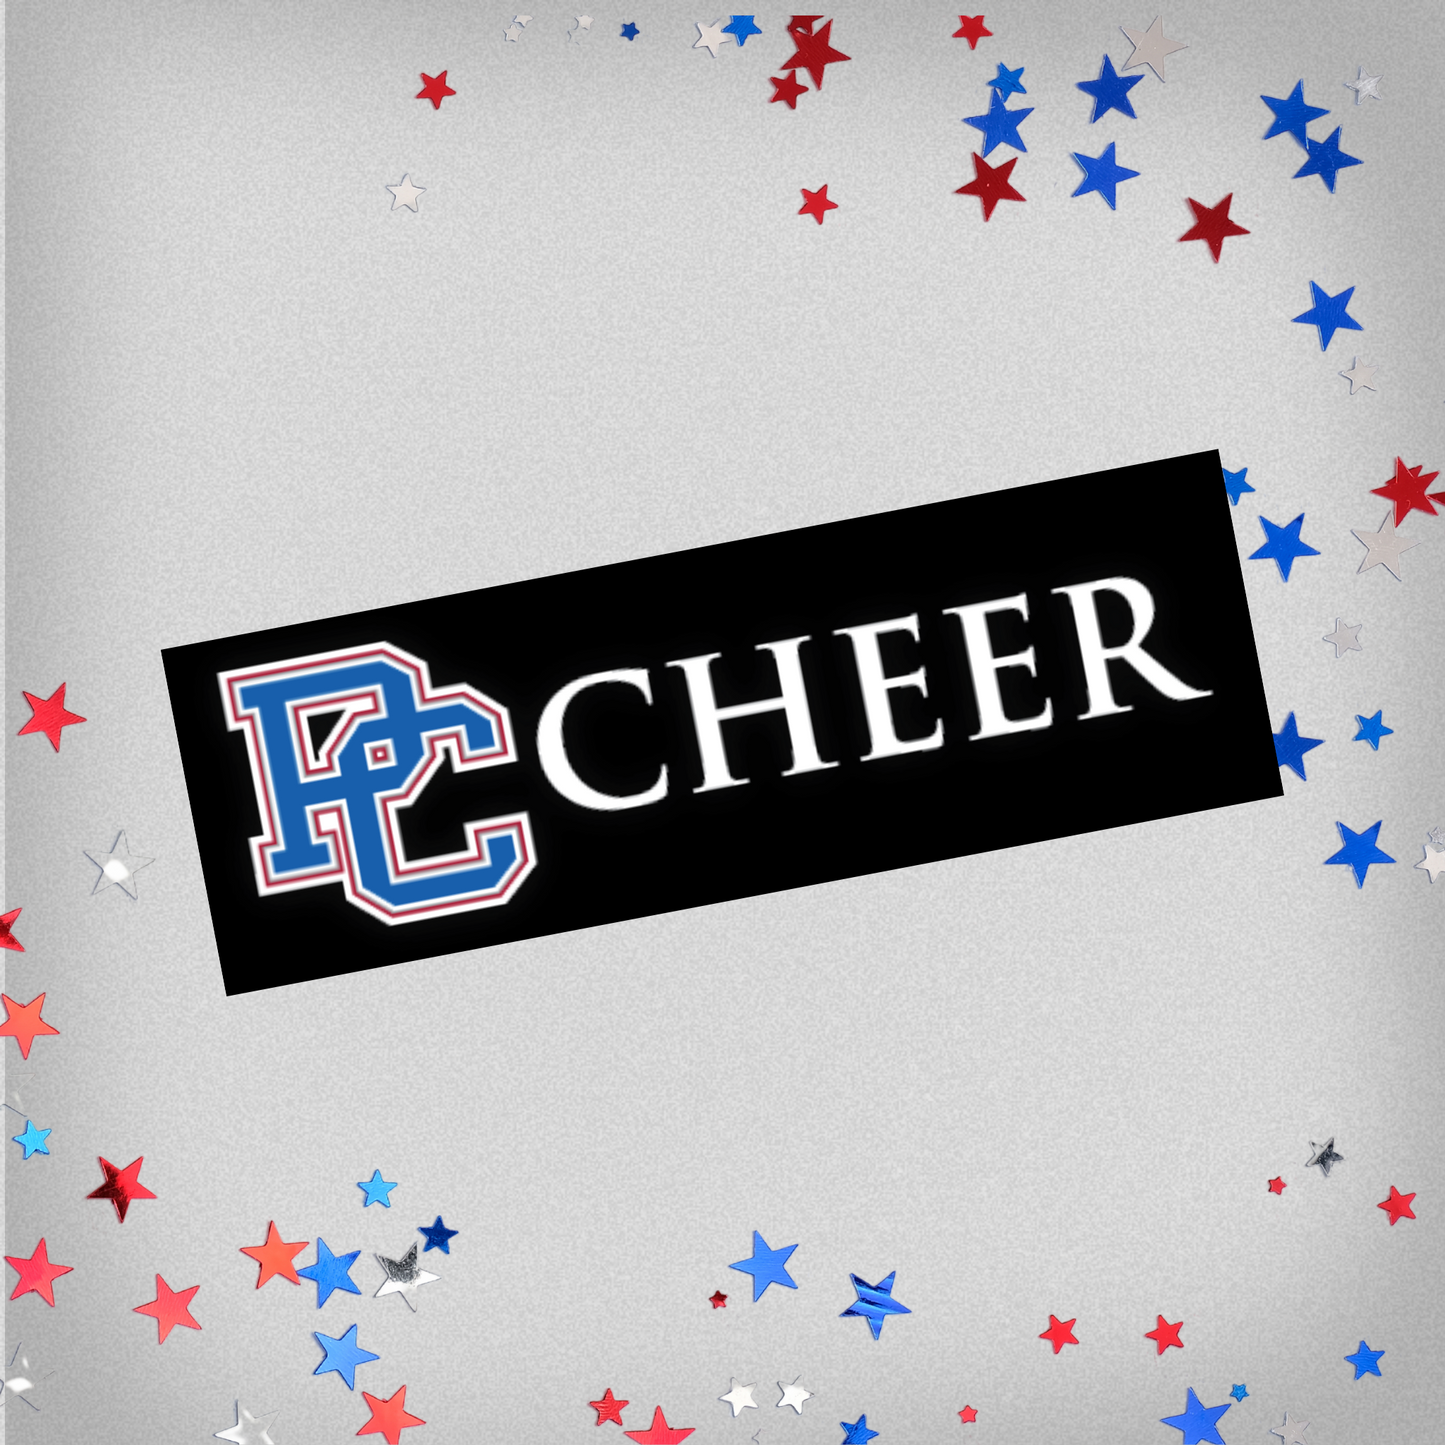 PC Cheer Decal